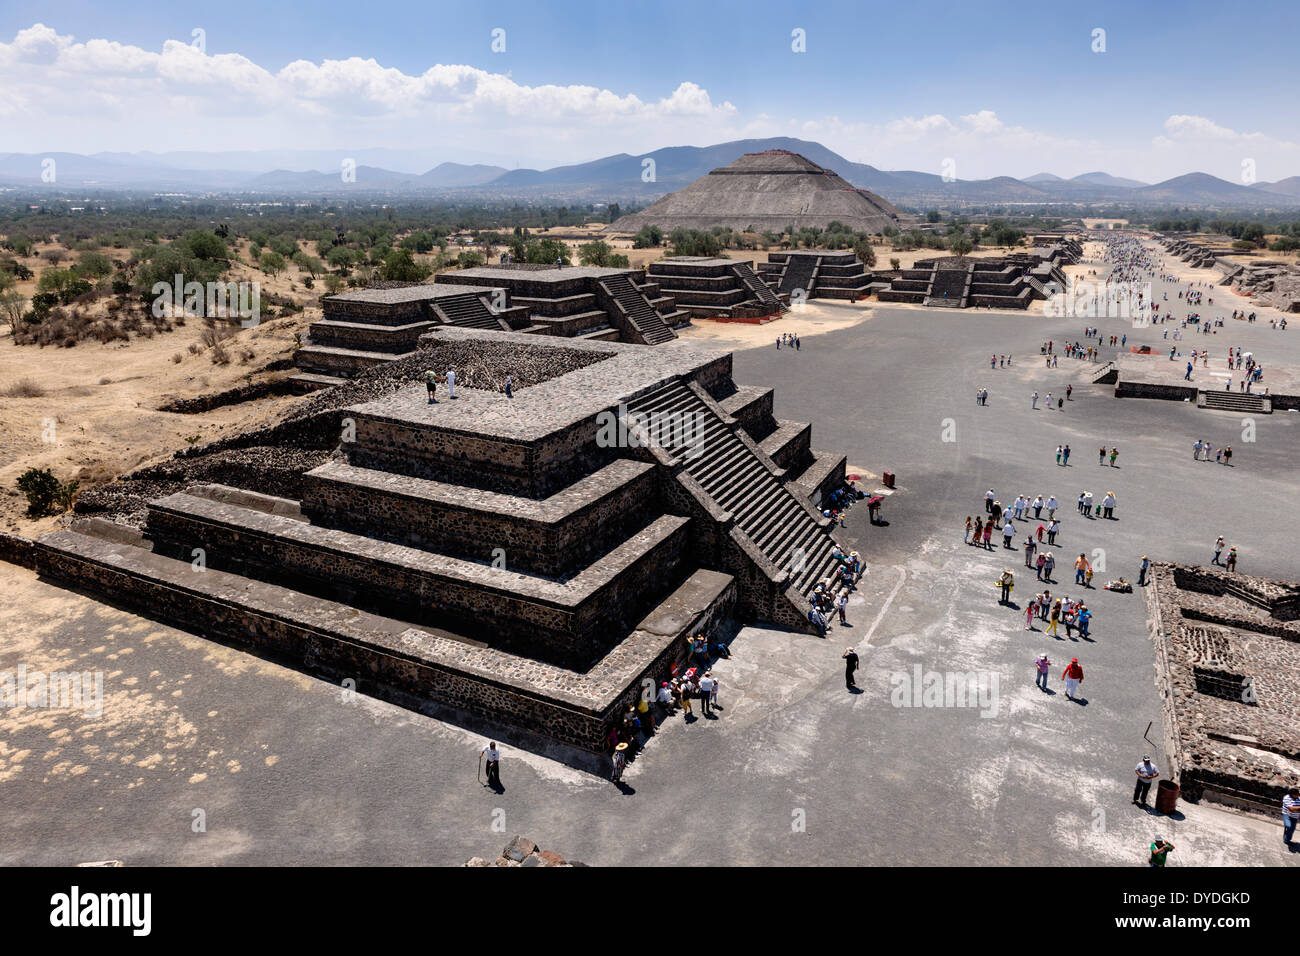 View from the Pyramid of the Moon at Teotihuacan in Mexico City. Stock Photo